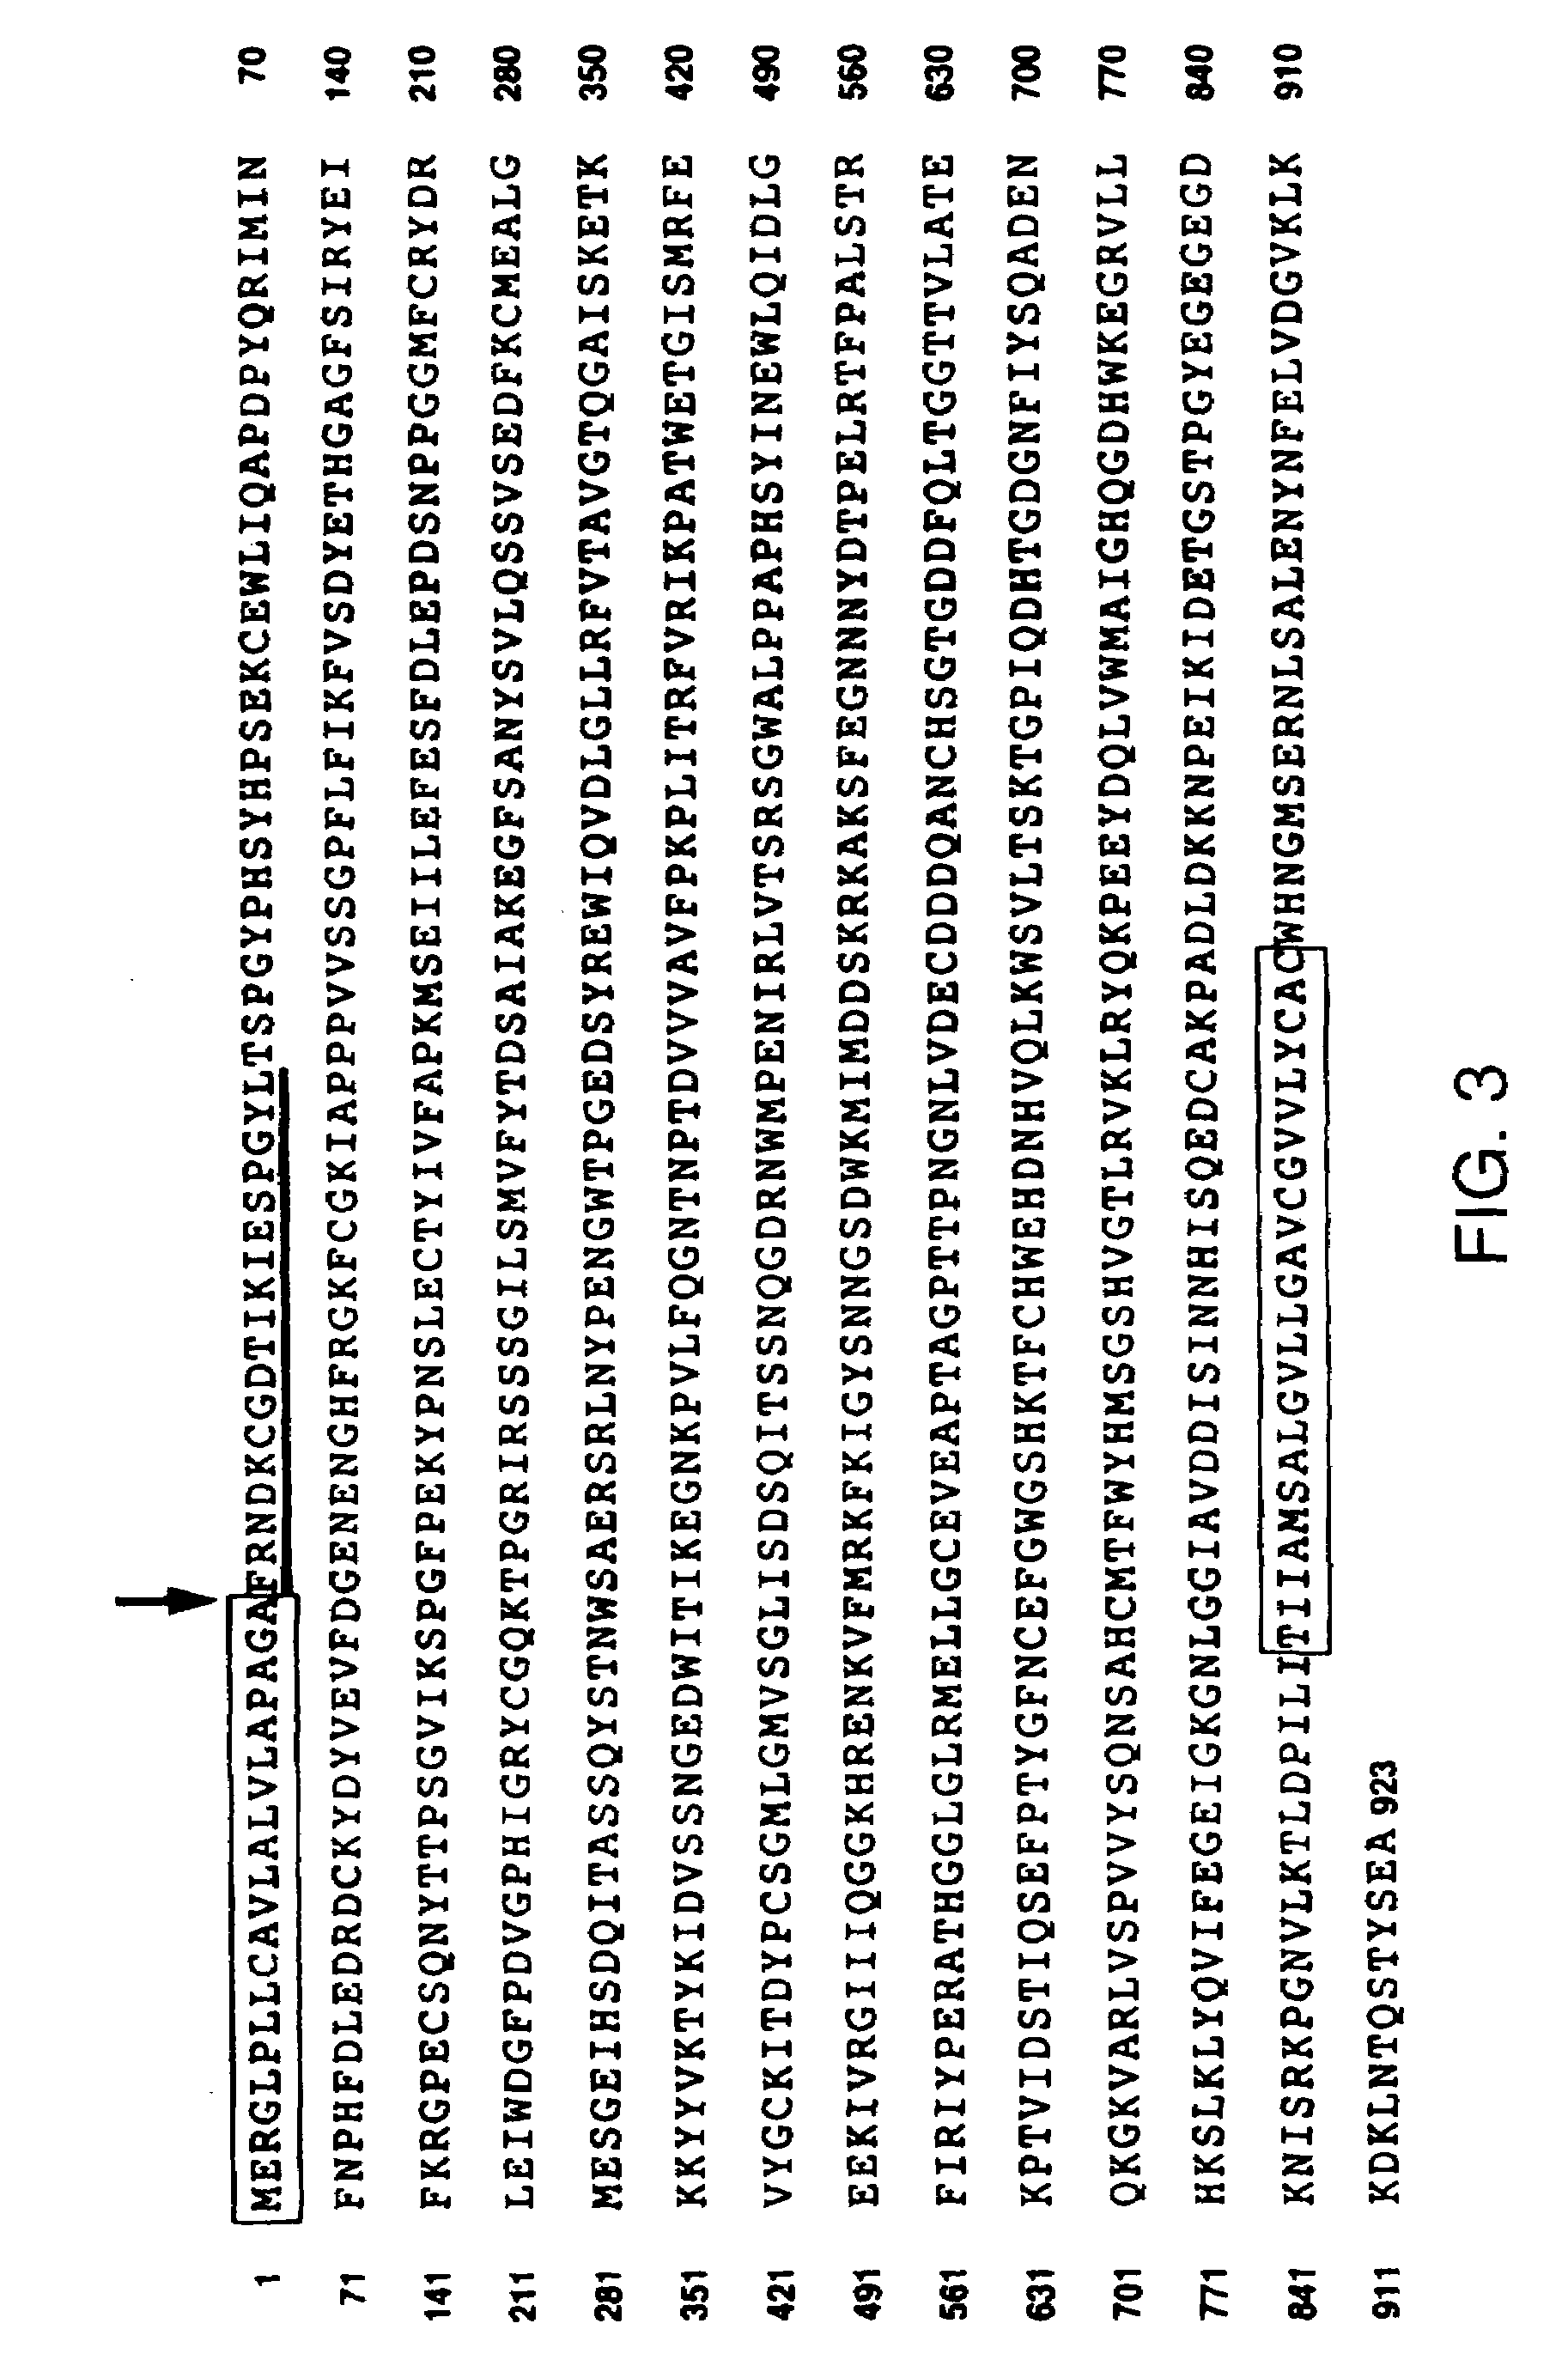 Soluble inhibitors of vascular endothelial growth factor and use thereof